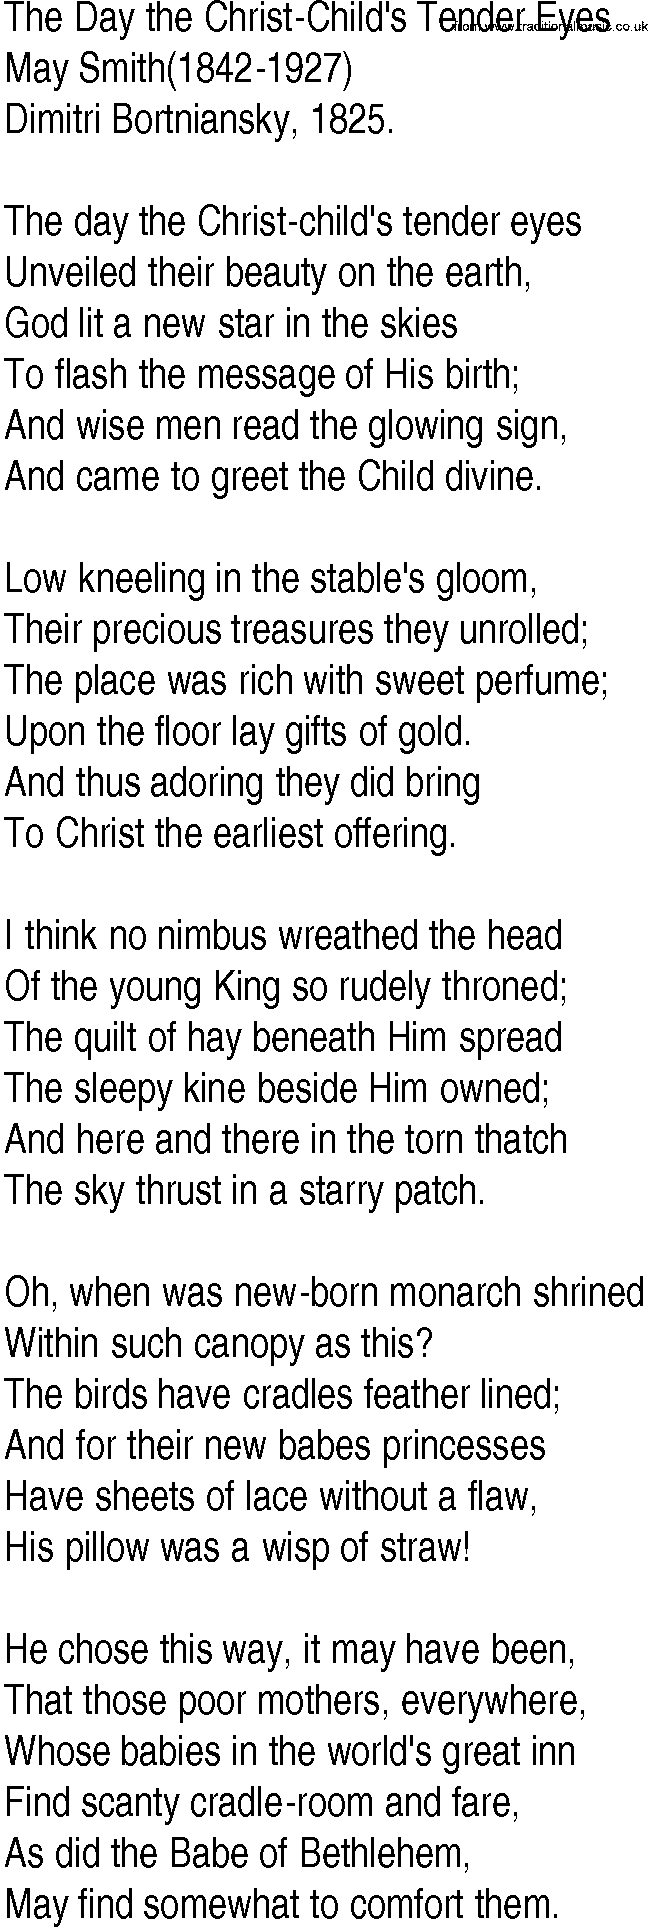 Hymn and Gospel Song: The Day the Christ-Child's Tender Eyes by May Smith lyrics